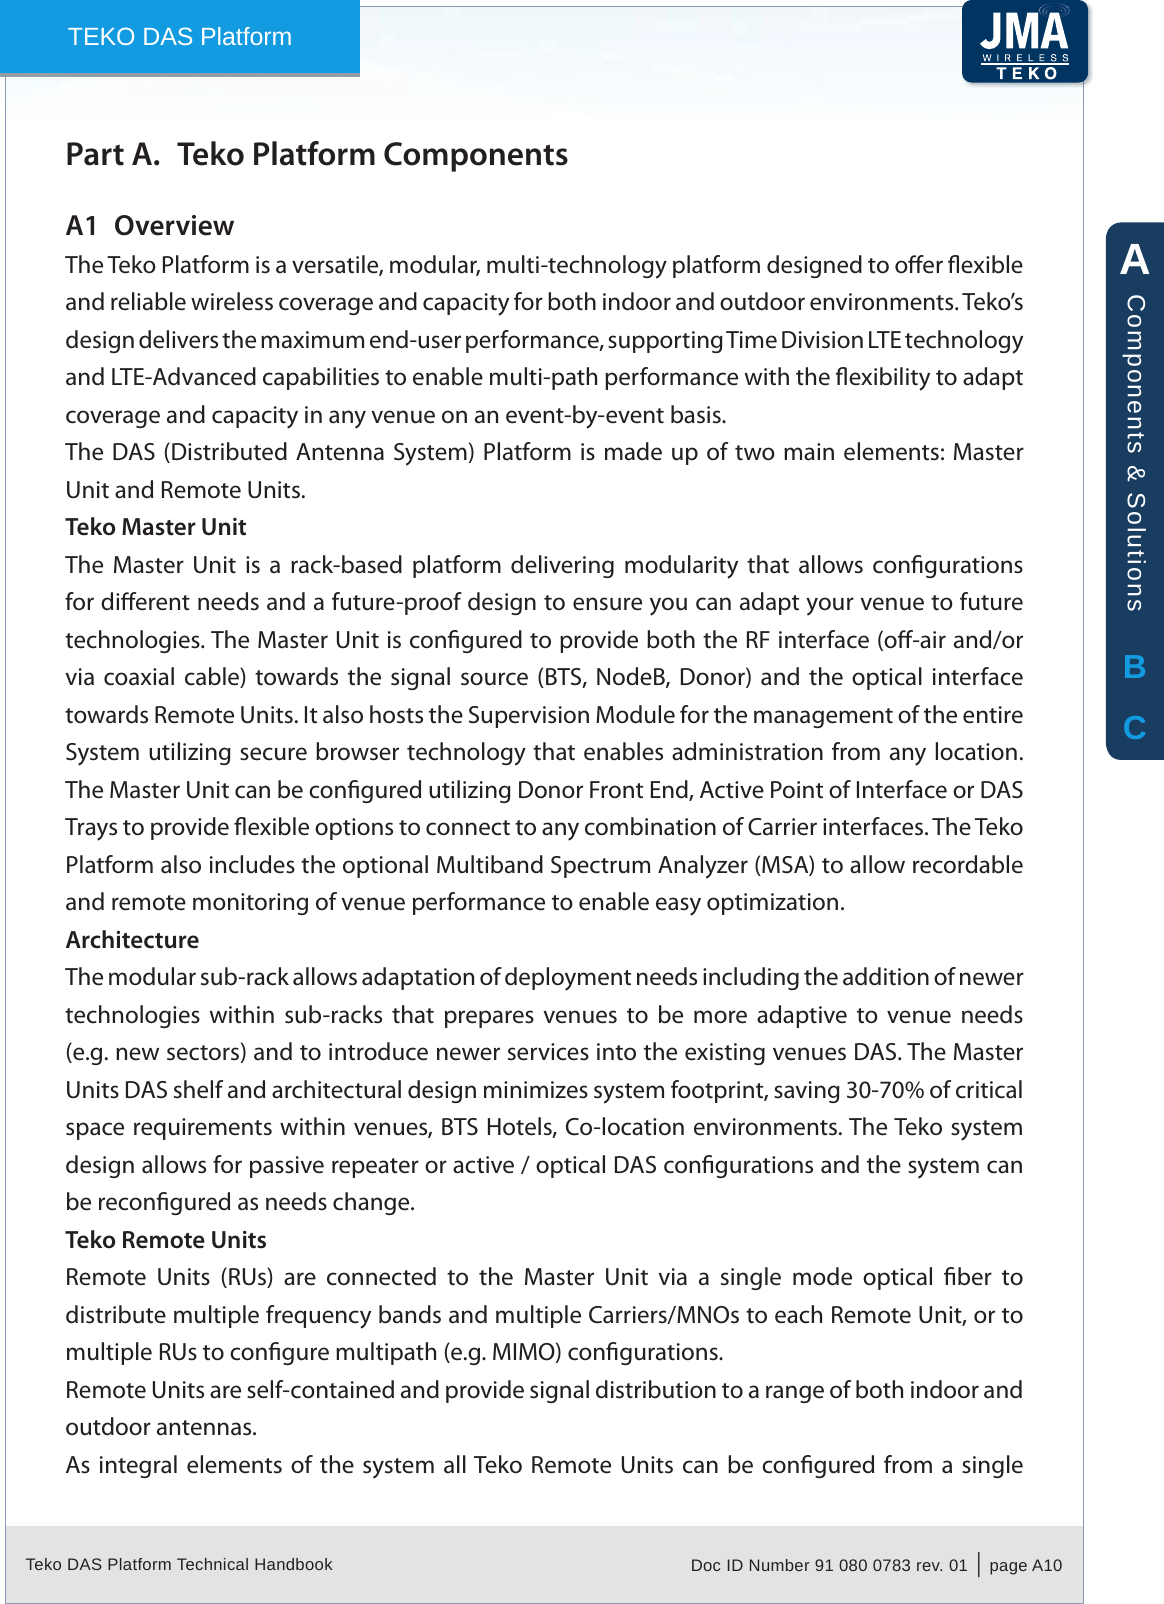 Teko DAS Platform Technical Handbook Doc ID Number 91 080 0783 rev. 01  |  page A10TEKO DAS PlatformTeko Platform ComponentsPart A. OverviewA1 The Teko Platform is a versatile, modular, multi-technology platform designed to oer exible and reliable wireless coverage and capacity for both indoor and outdoor environments. Teko’s design delivers the maximum end-user performance, supporting Time Division LTE technology and LTE-Advanced capabilities to enable multi-path performance with the exibility to adapt coverage and capacity in any venue on an event-by-event basis.The DAS (Distributed Antenna System) Platform is made up of two main elements: Master Unit and Remote Units.Teko Master UnitThe  Master  Unit  is  a  rack-based  platform  delivering  modularity  that  allows  congurations for dierent needs and a future-proof design to ensure you can adapt your venue to future technologies. The Master Unit is congured to provide both the RF interface (o-air and/or via coaxial cable) towards the signal source (BTS, NodeB,  Donor)  and  the  optical  interface towards Remote Units. It also hosts the Supervision Module for the management of the entire System utilizing secure browser technology that enables administration from any location. The Master Unit can be congured utilizing Donor Front End, Active Point of Interface or DAS Trays to provide exible options to connect to any combination of Carrier interfaces. The Teko Platform also includes the optional Multiband Spectrum Analyzer (MSA) to allow recordable and remote monitoring of venue performance to enable easy optimization.ArchitectureThe modular sub-rack allows adaptation of deployment needs including the addition of newer technologies  within  sub-racks  that  prepares  venues  to  be  more  adaptive  to  venue  needs (e.g. new sectors) and to introduce newer services into the existing venues DAS. The Master Units DAS shelf and architectural design minimizes system footprint, saving 30-70% of critical space requirements within venues, BTS Hotels, Co-location environments. The Teko system design allows for passive repeater or active / optical DAS congurations and the system can be recongured as needs change. Teko Remote UnitsRemote  Units  (RUs)  are  connected  to  the  Master  Unit  via  a  single  mode  optical  ber  to distribute multiple frequency bands and multiple Carriers/MNOs to each Remote Unit, or to multiple RUs to congure multipath (e.g. MIMO) congurations.Remote Units are self-contained and provide signal distribution to a range of both indoor and outdoor antennas.As integral elements  of the system all Teko Remote Units can be congured from a single ABCComponents &amp; Solutions